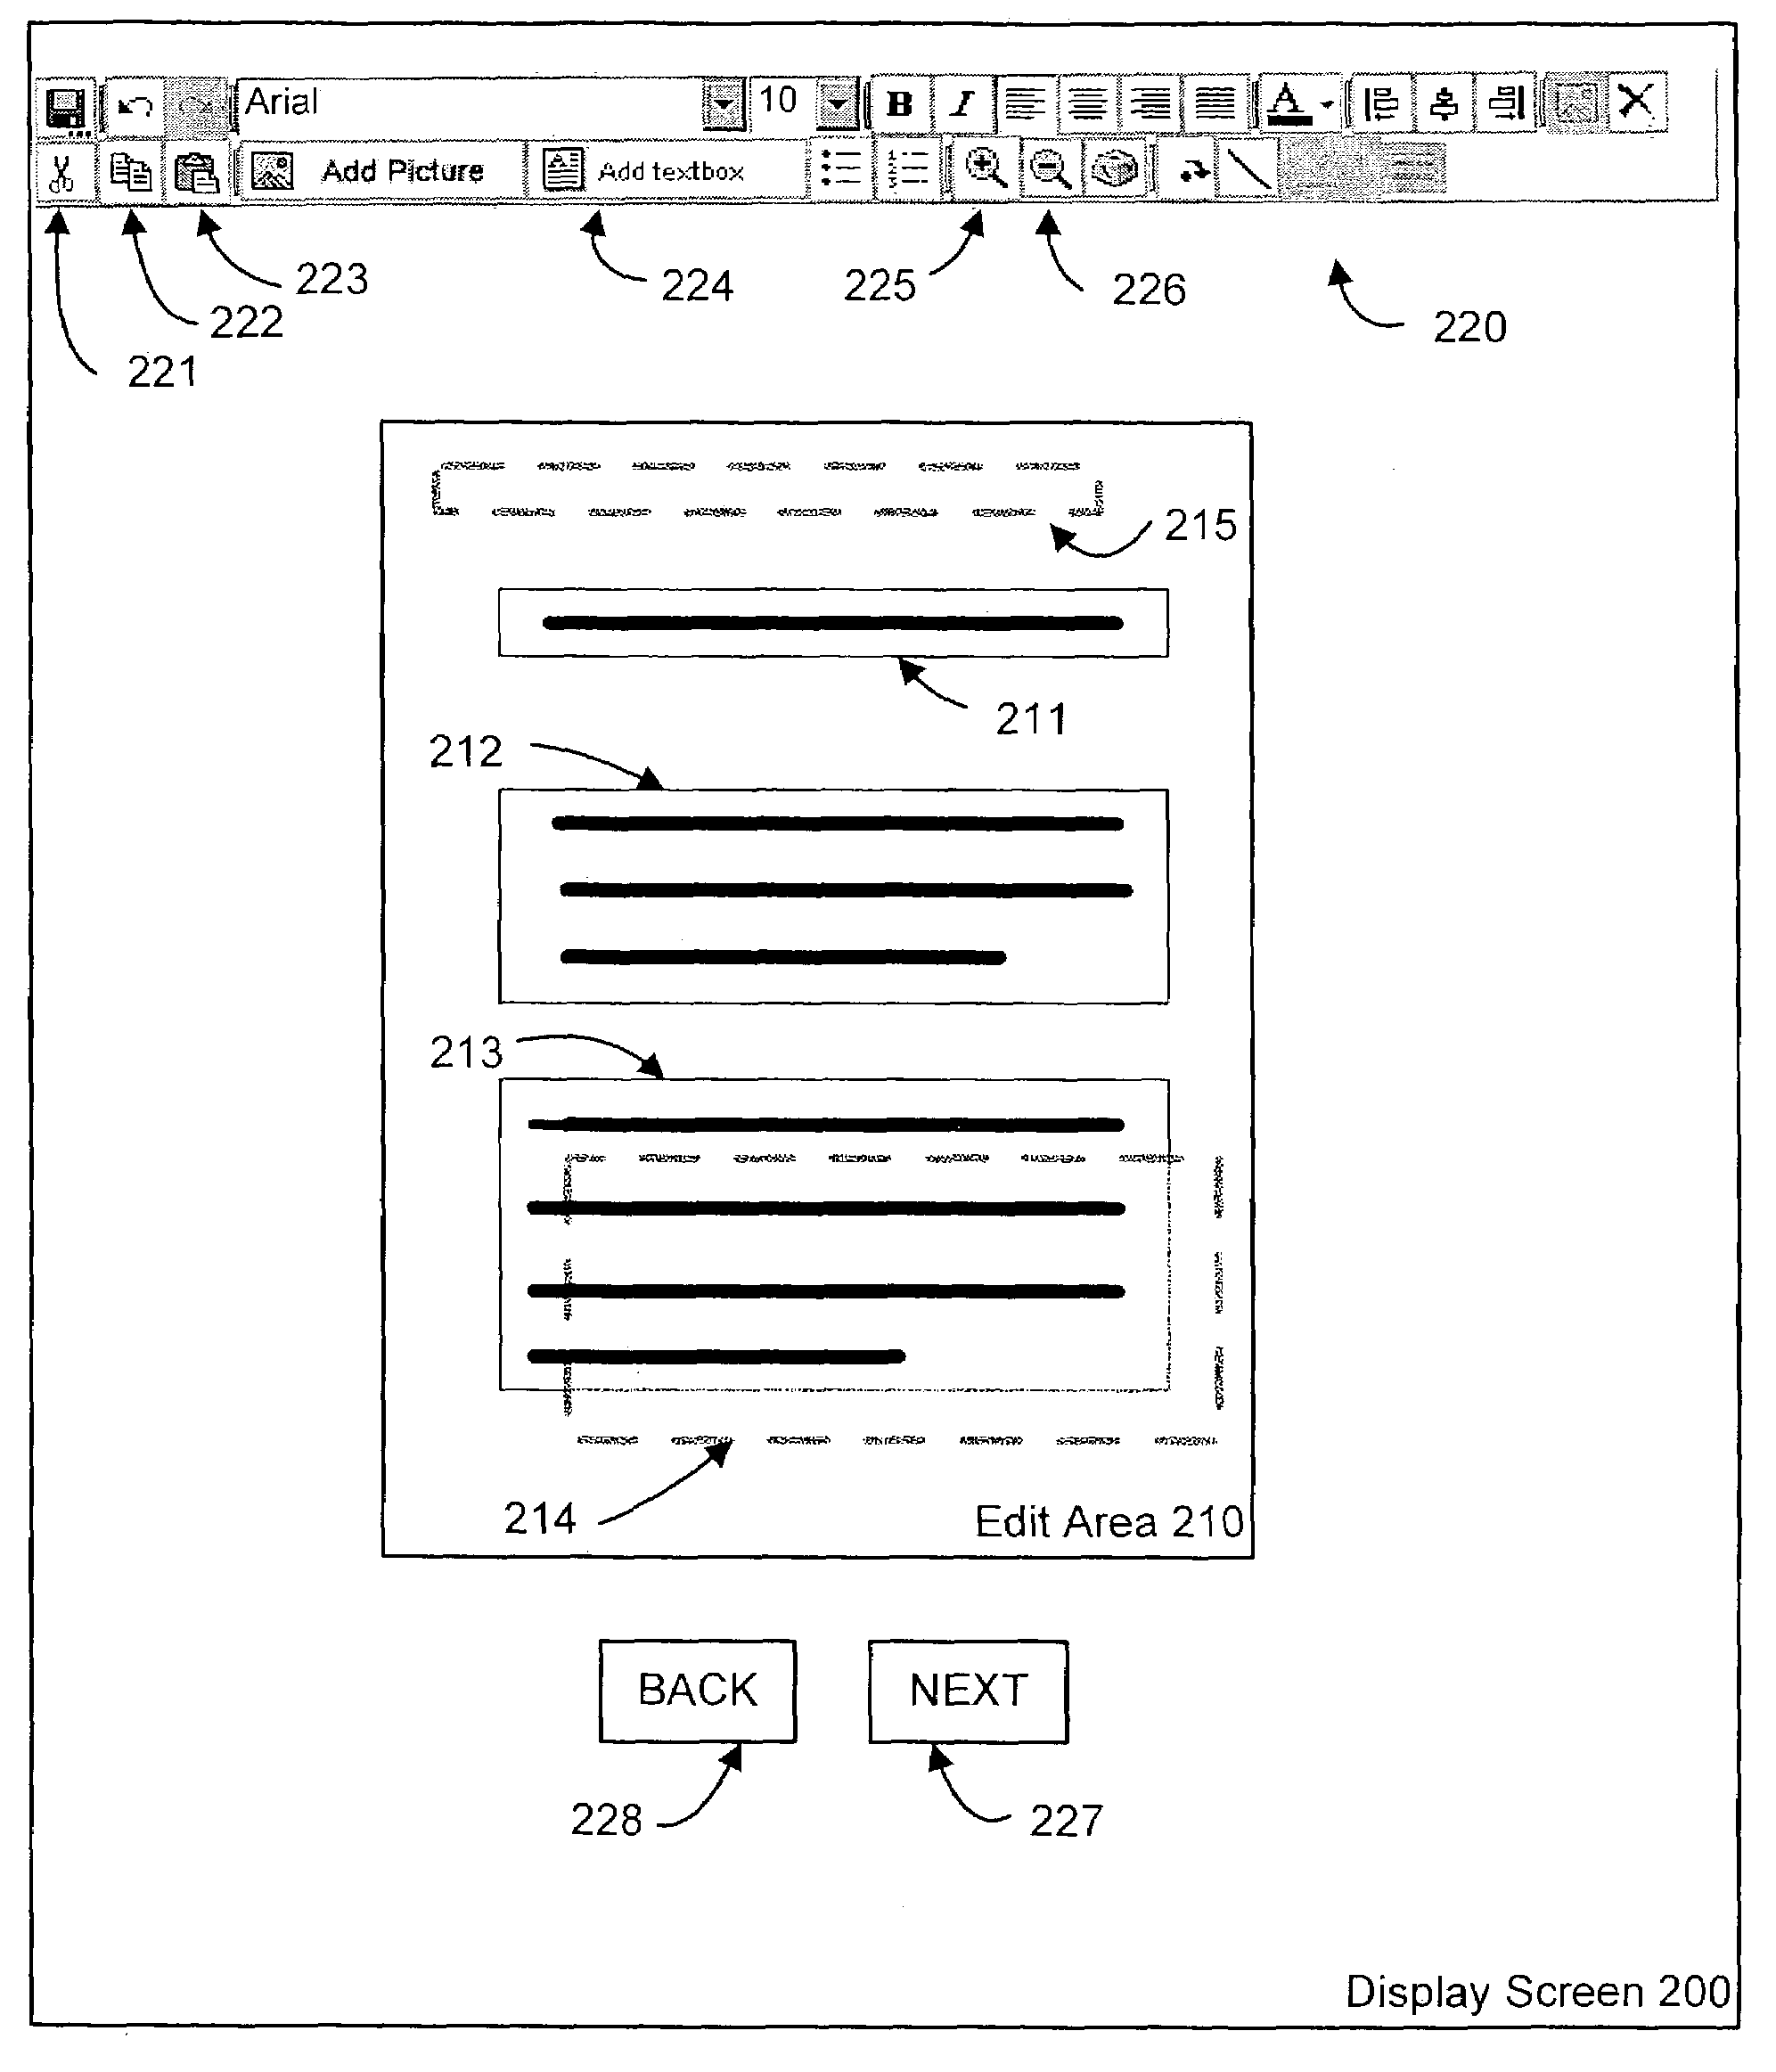 Methods employing multiple clipboards for storing and pasting textbook components